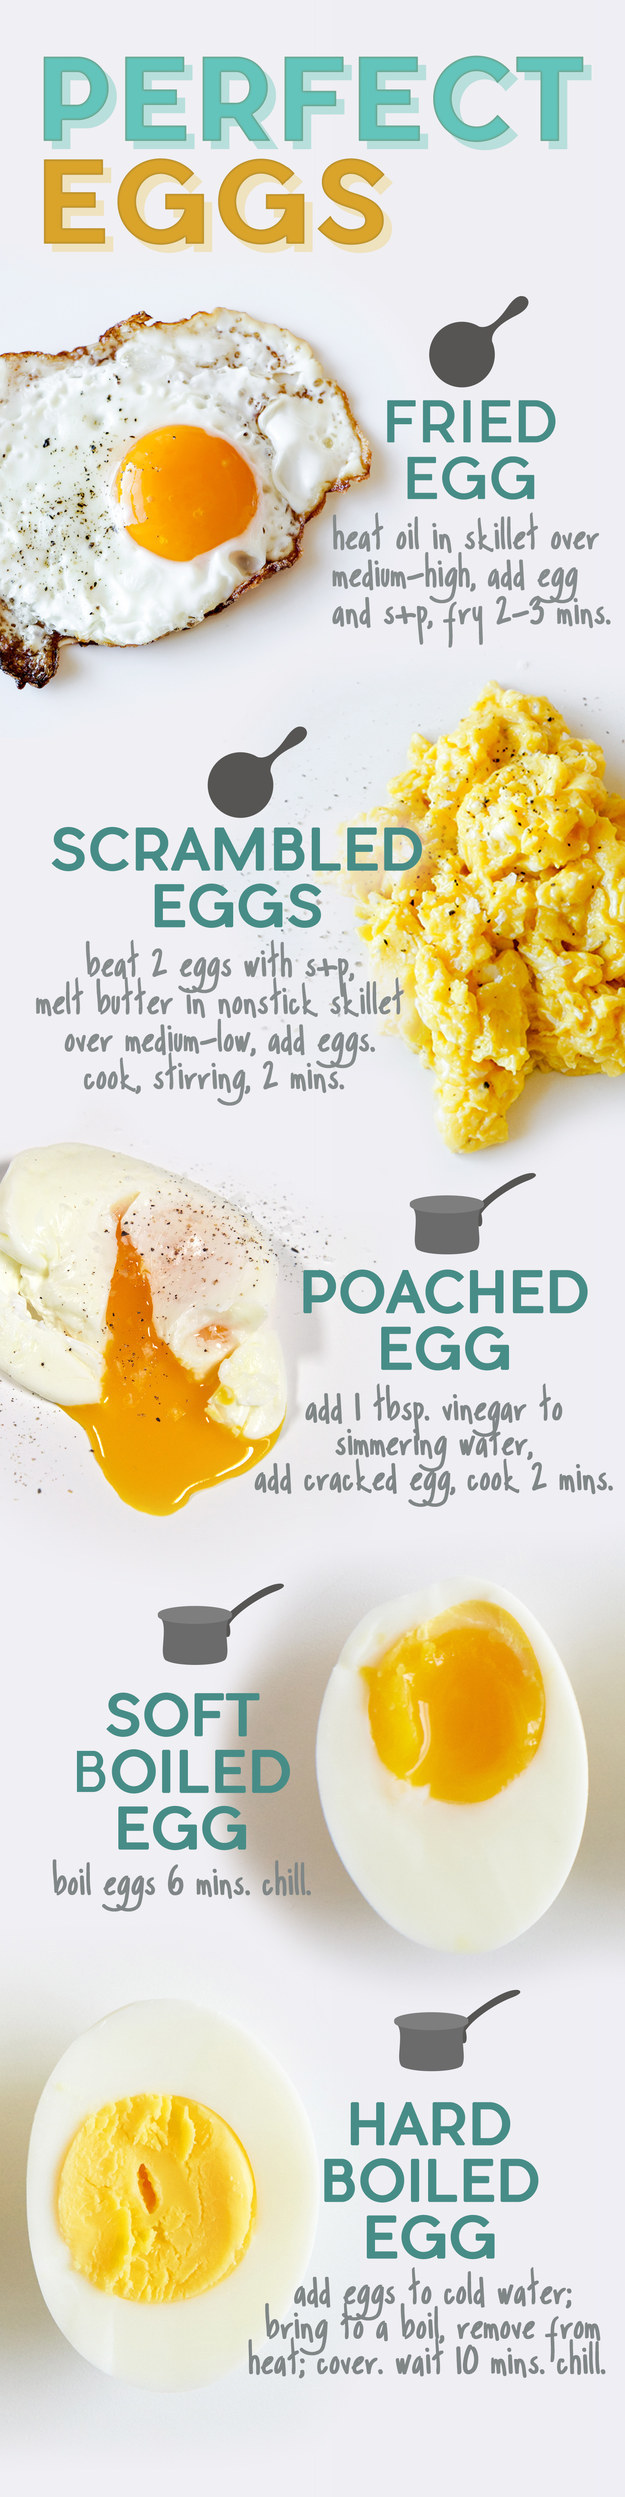 How To Cook Perfect Eggs